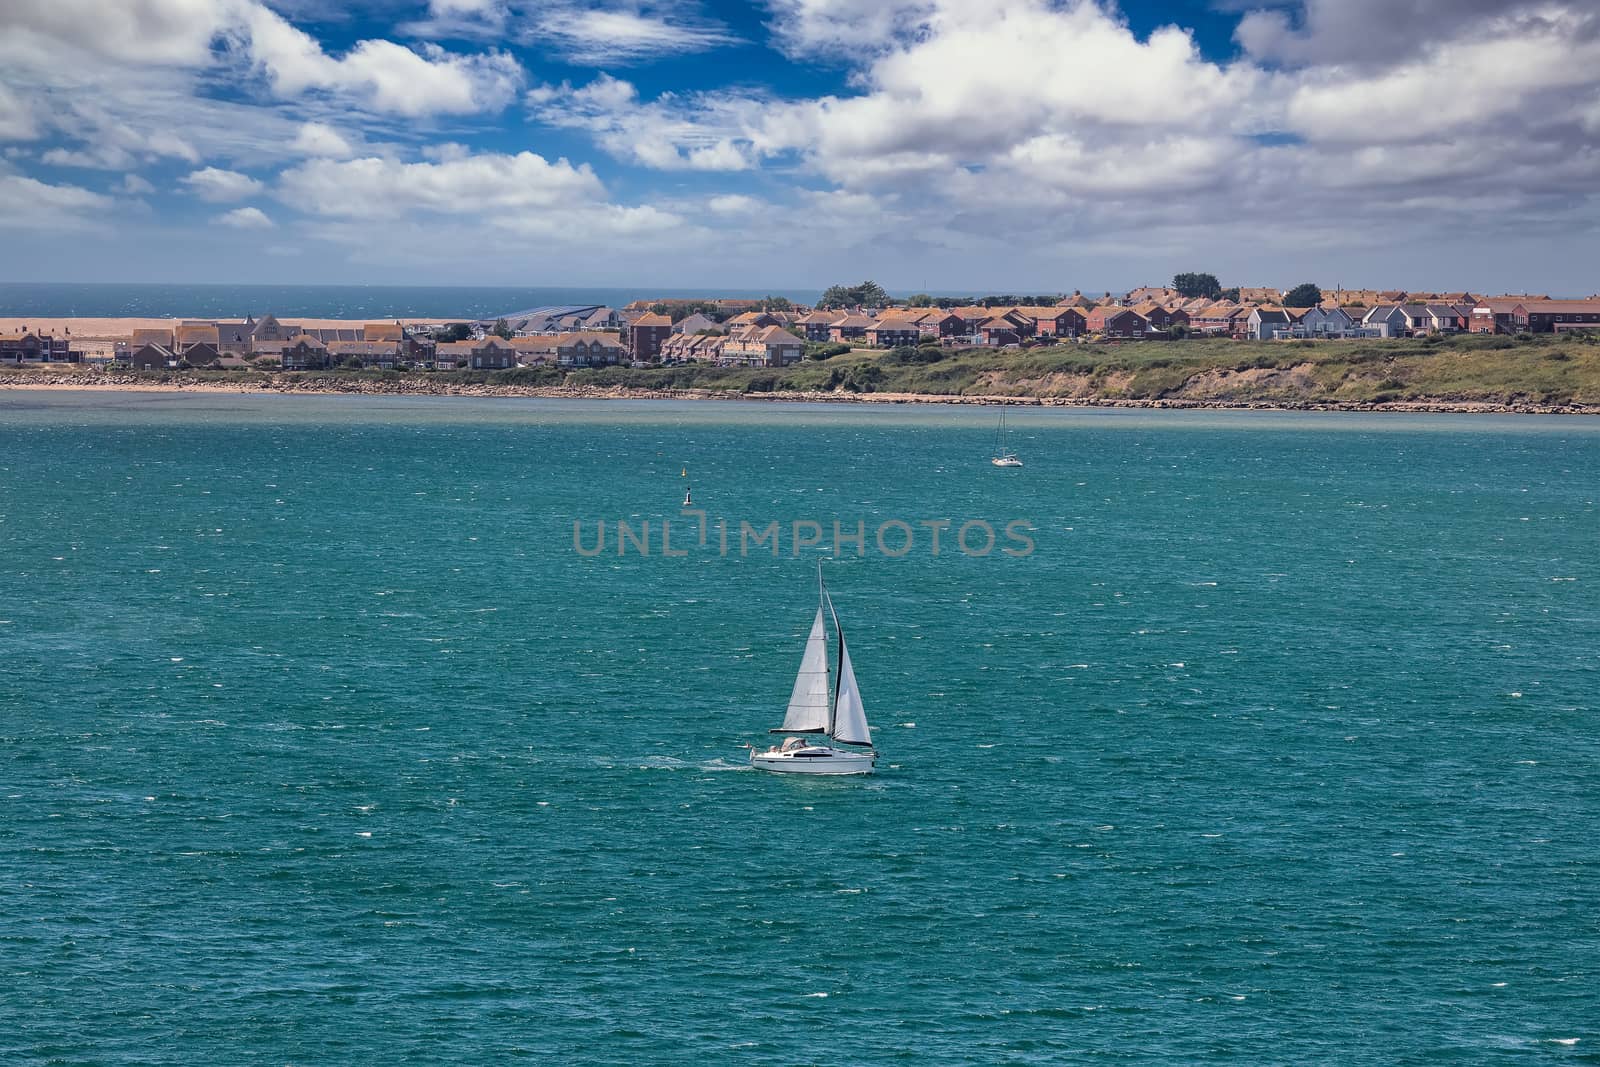 High angle shot of a white sailboat sailing in Weymouth Bay, UK. Coast line with some houses and gorgeous cloudy blue sky in the background. Sport and recreation concept.